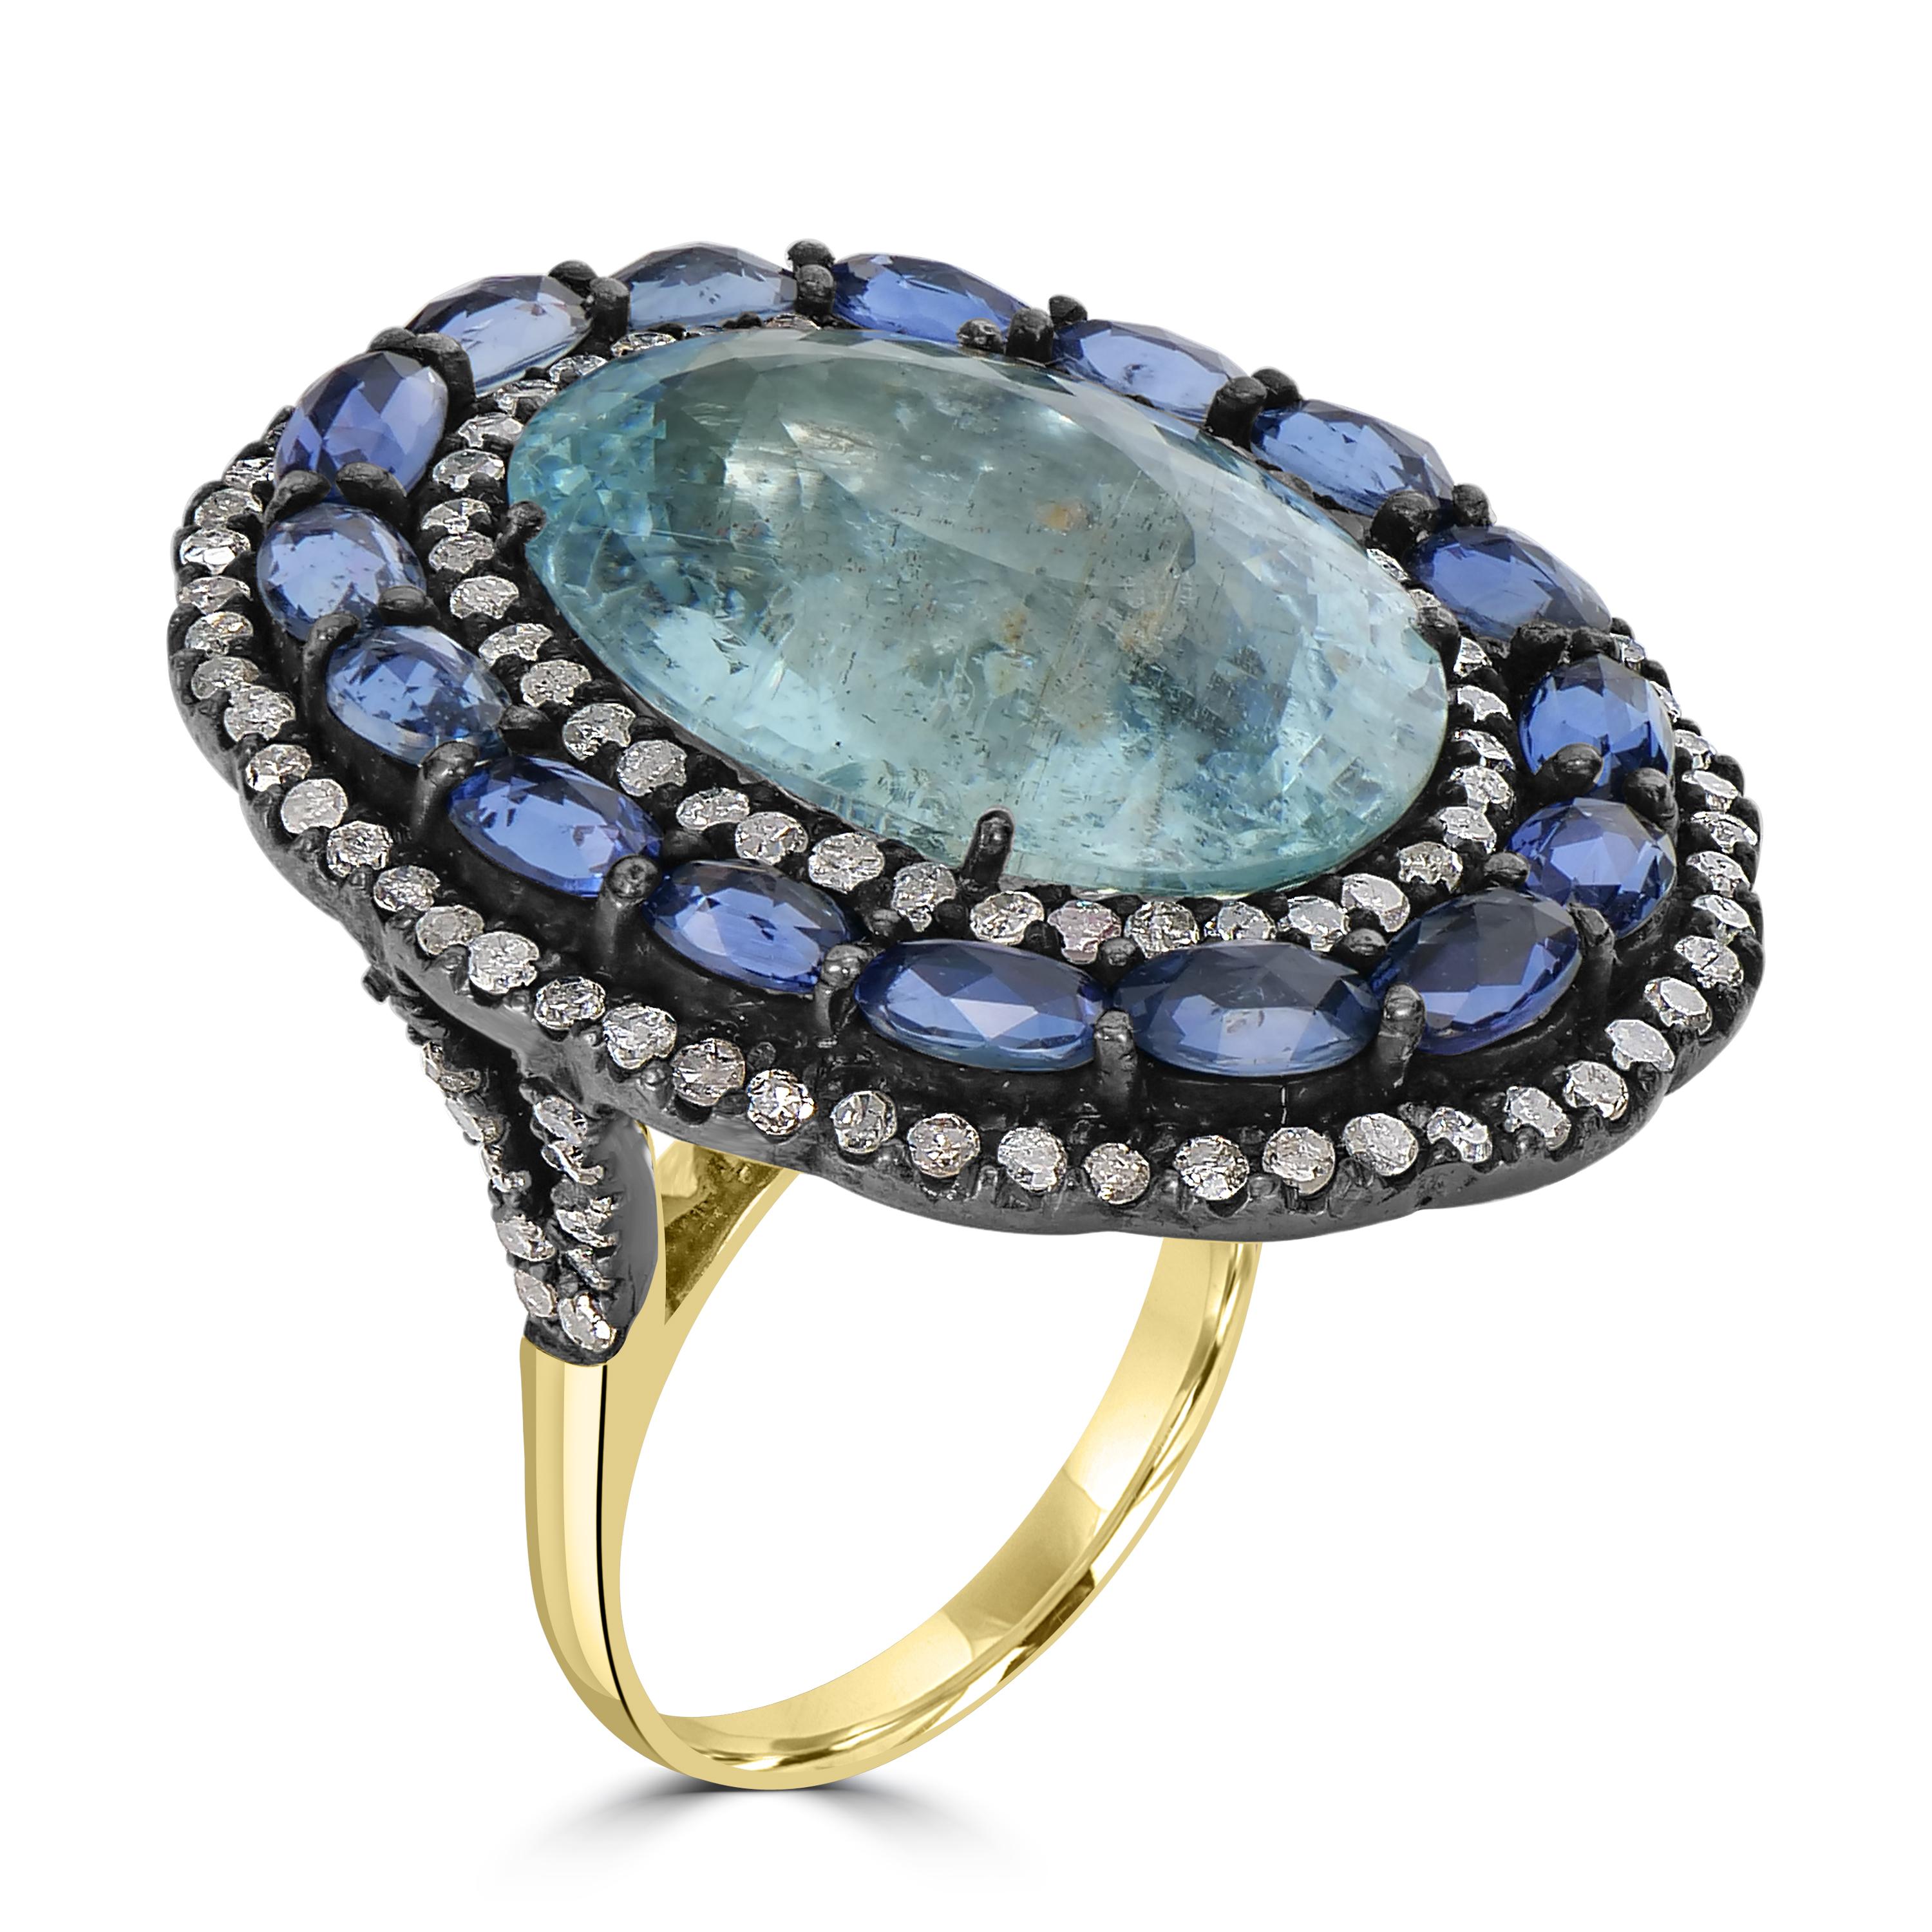 Step into a world of opulence with the Victorian 22 Cttw. Aquamarine, Sapphire, and Diamond Split Shank Cocktail Ring — a dazzling embodiment of sophistication and style. At its core, a resplendent 16-carat oval aquamarine takes center stage,